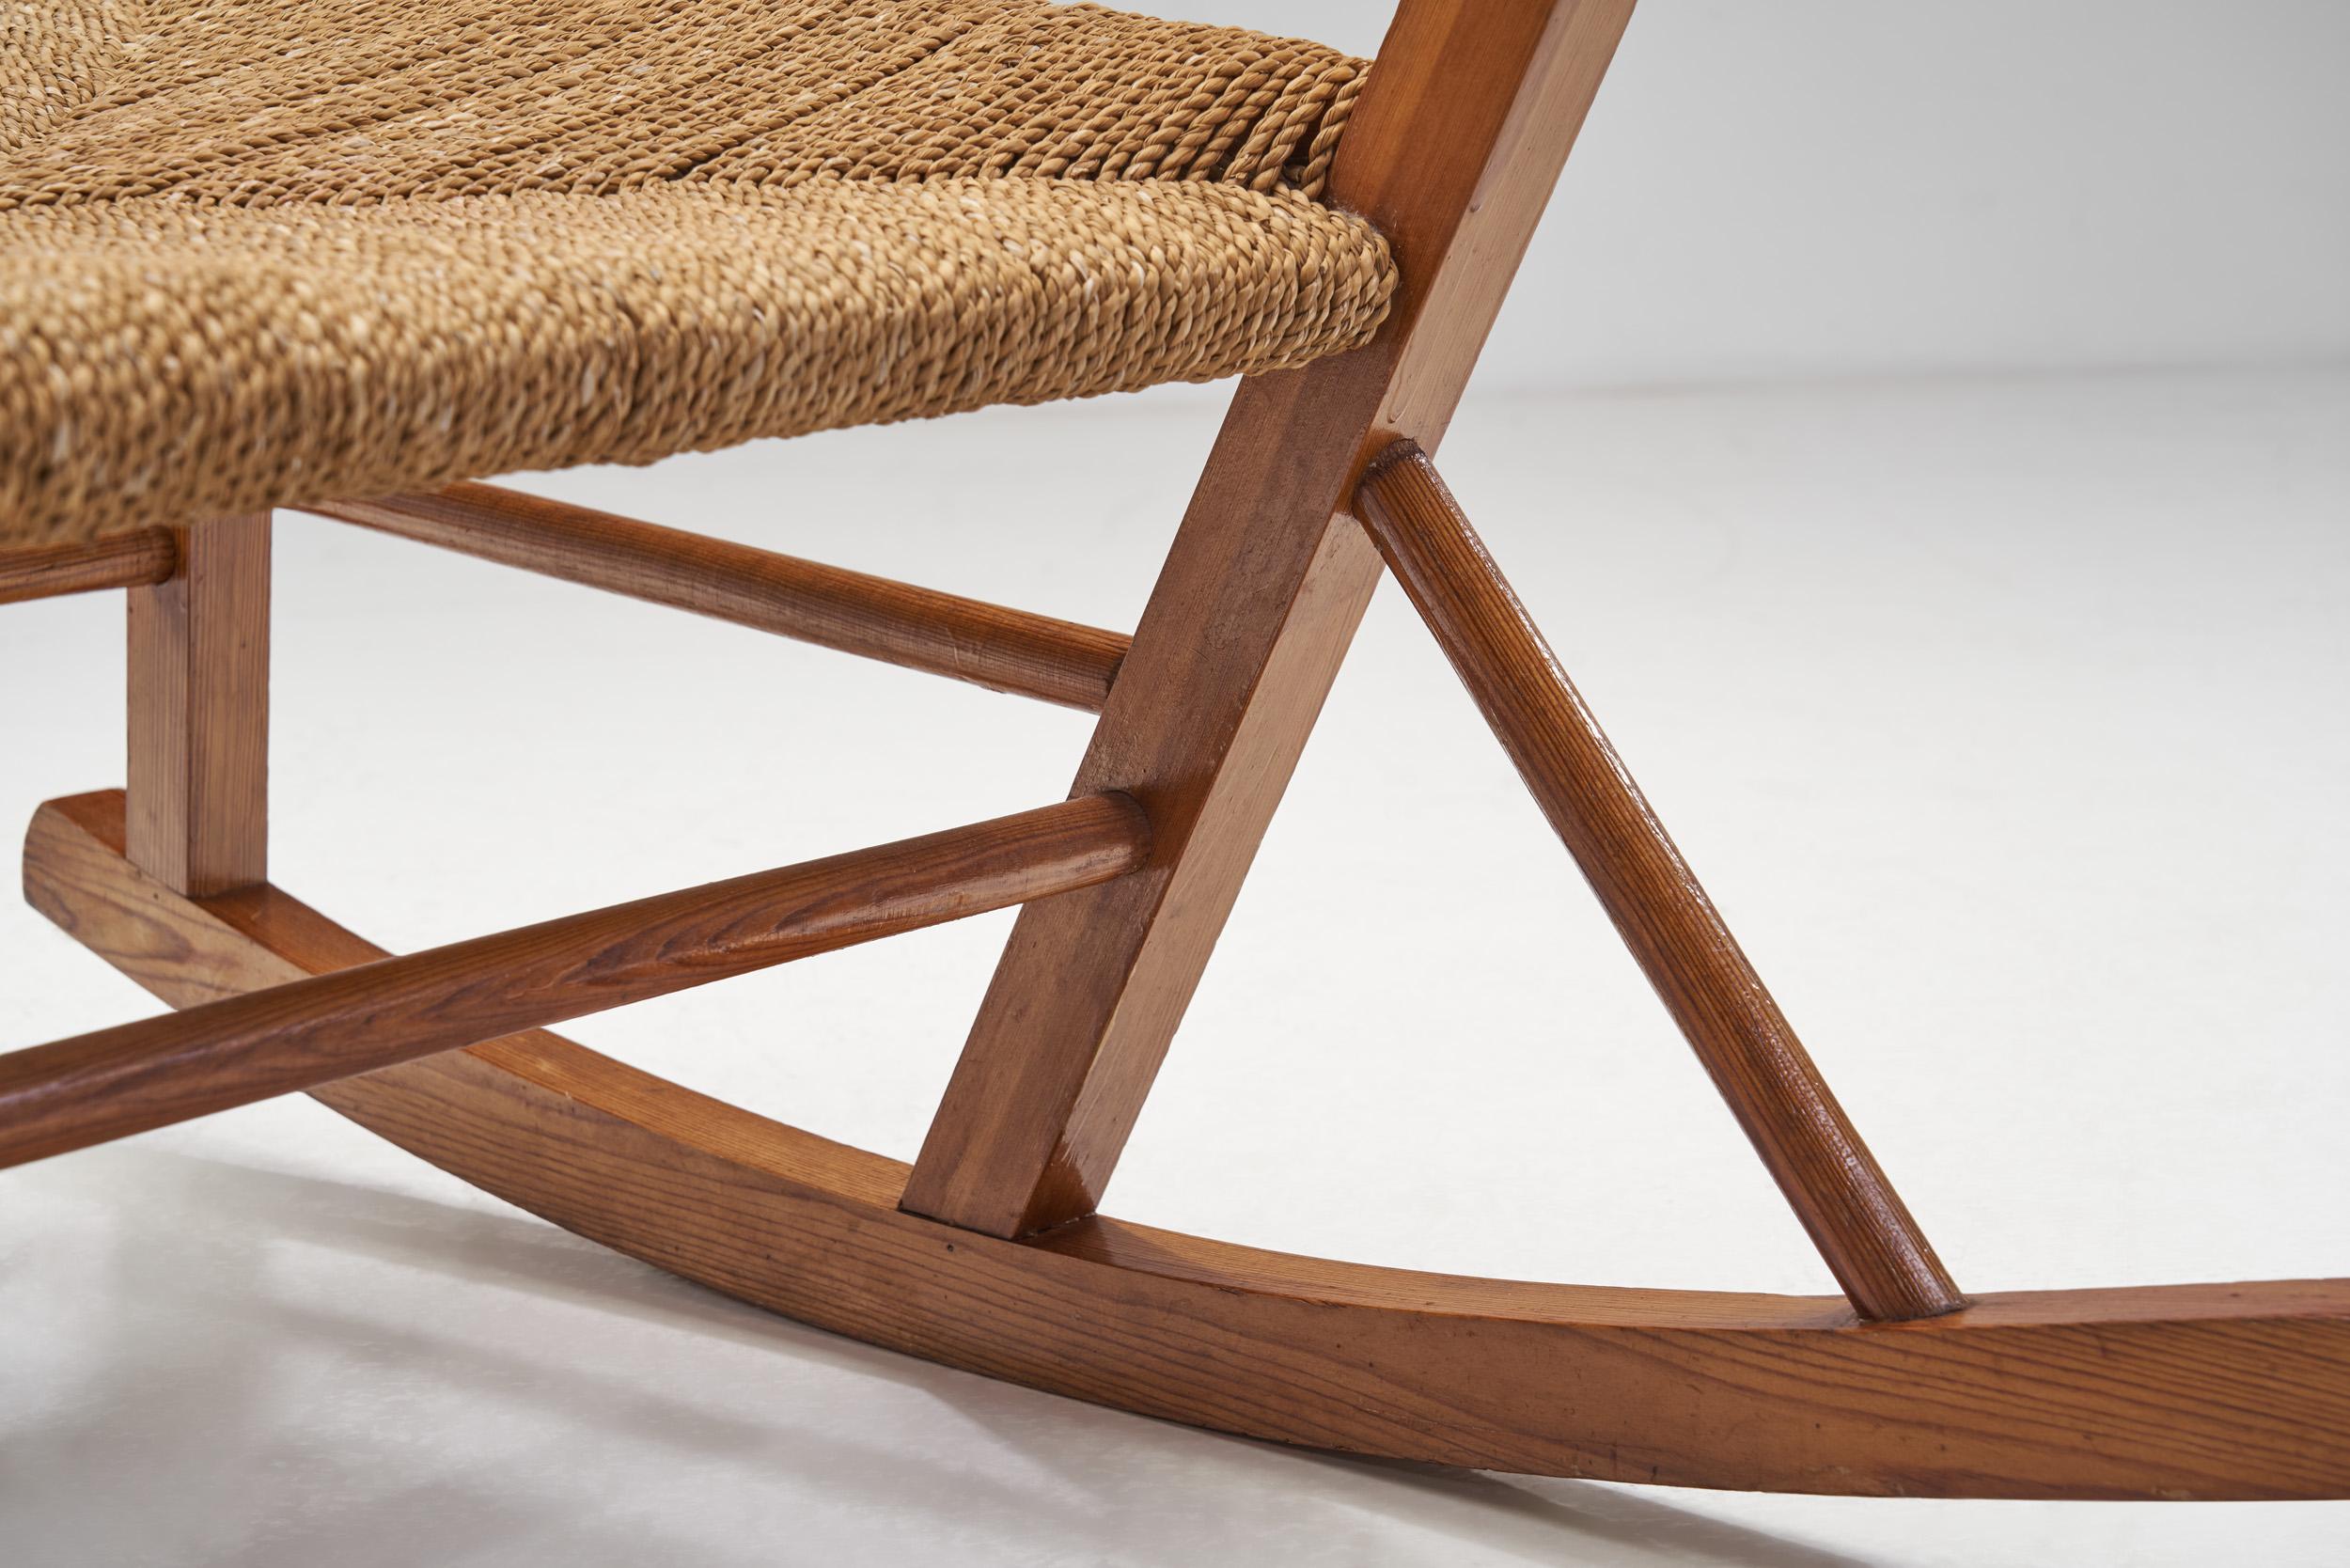 Norwegian Wood and Papercord Rocking Chairs by Slåke Møbelfabrikk, Norway 1940s For Sale 11